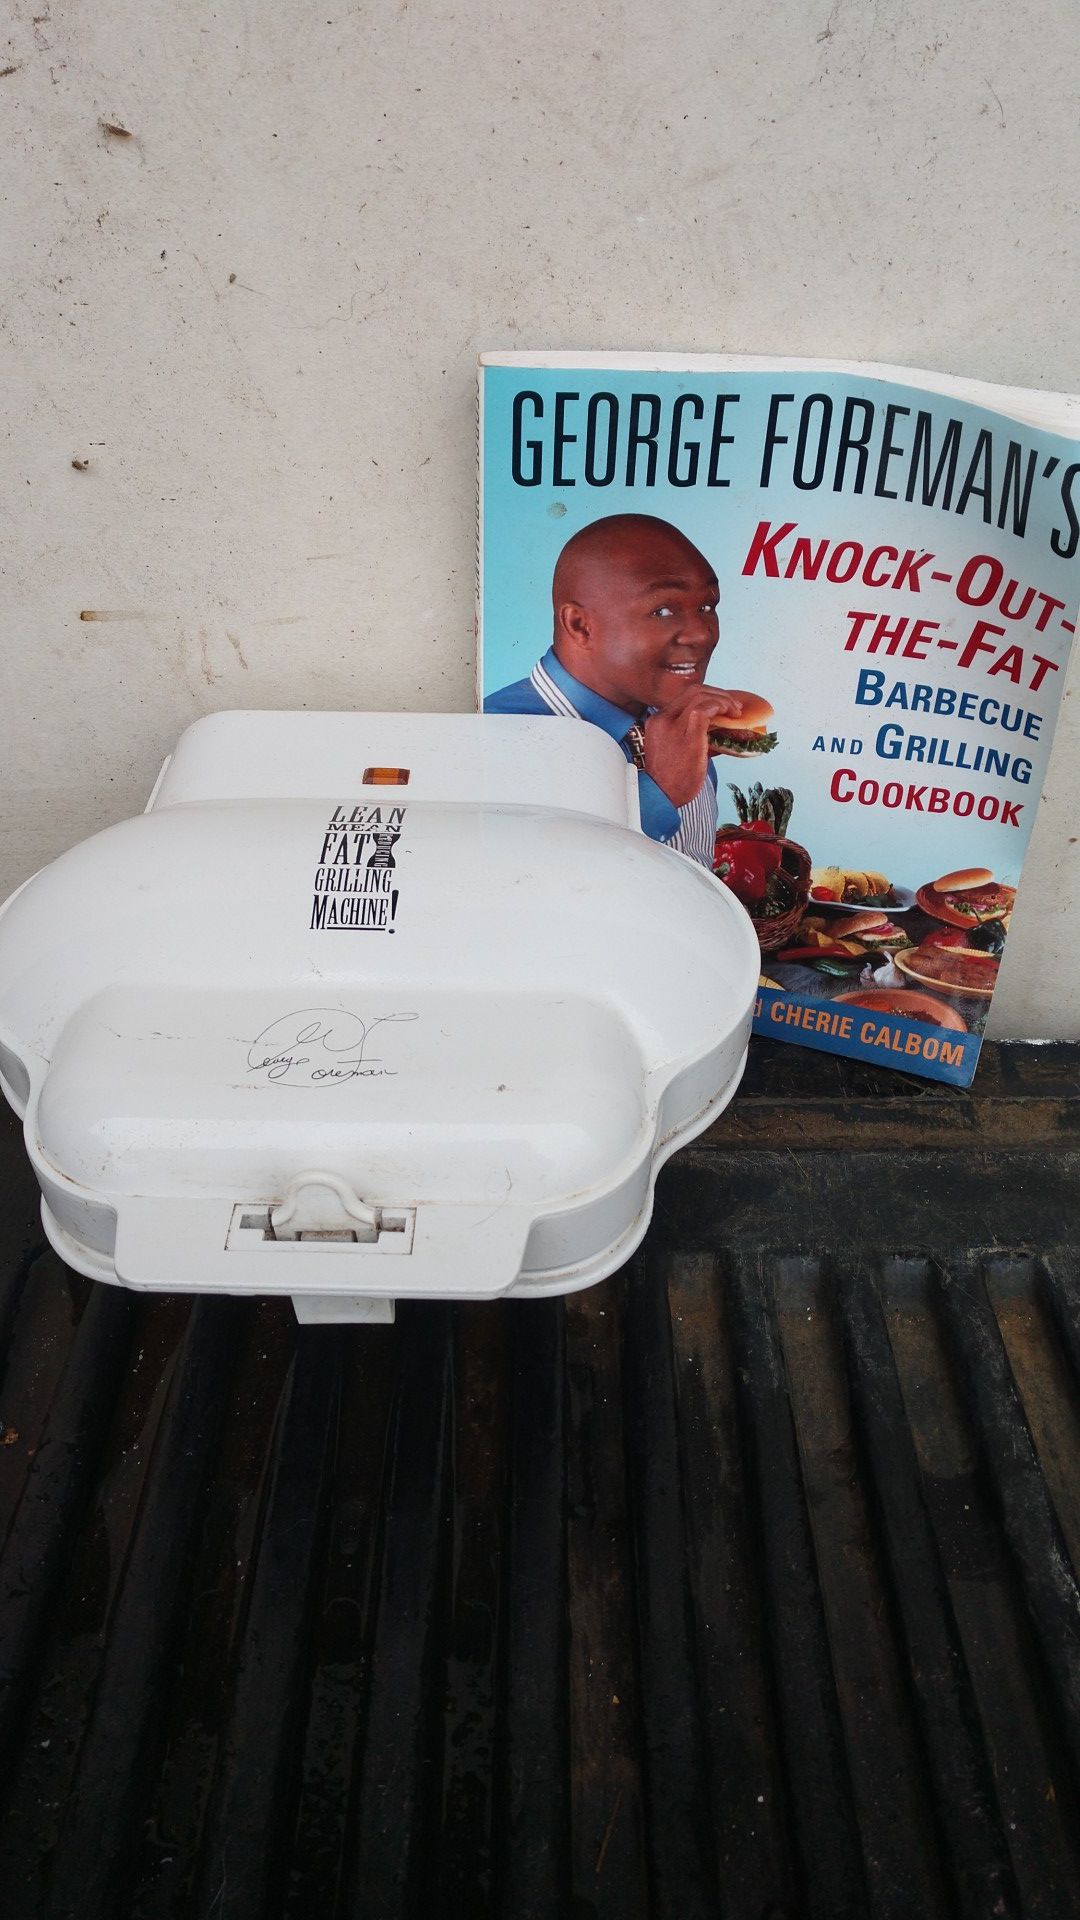 George forman grill with George forman cook book